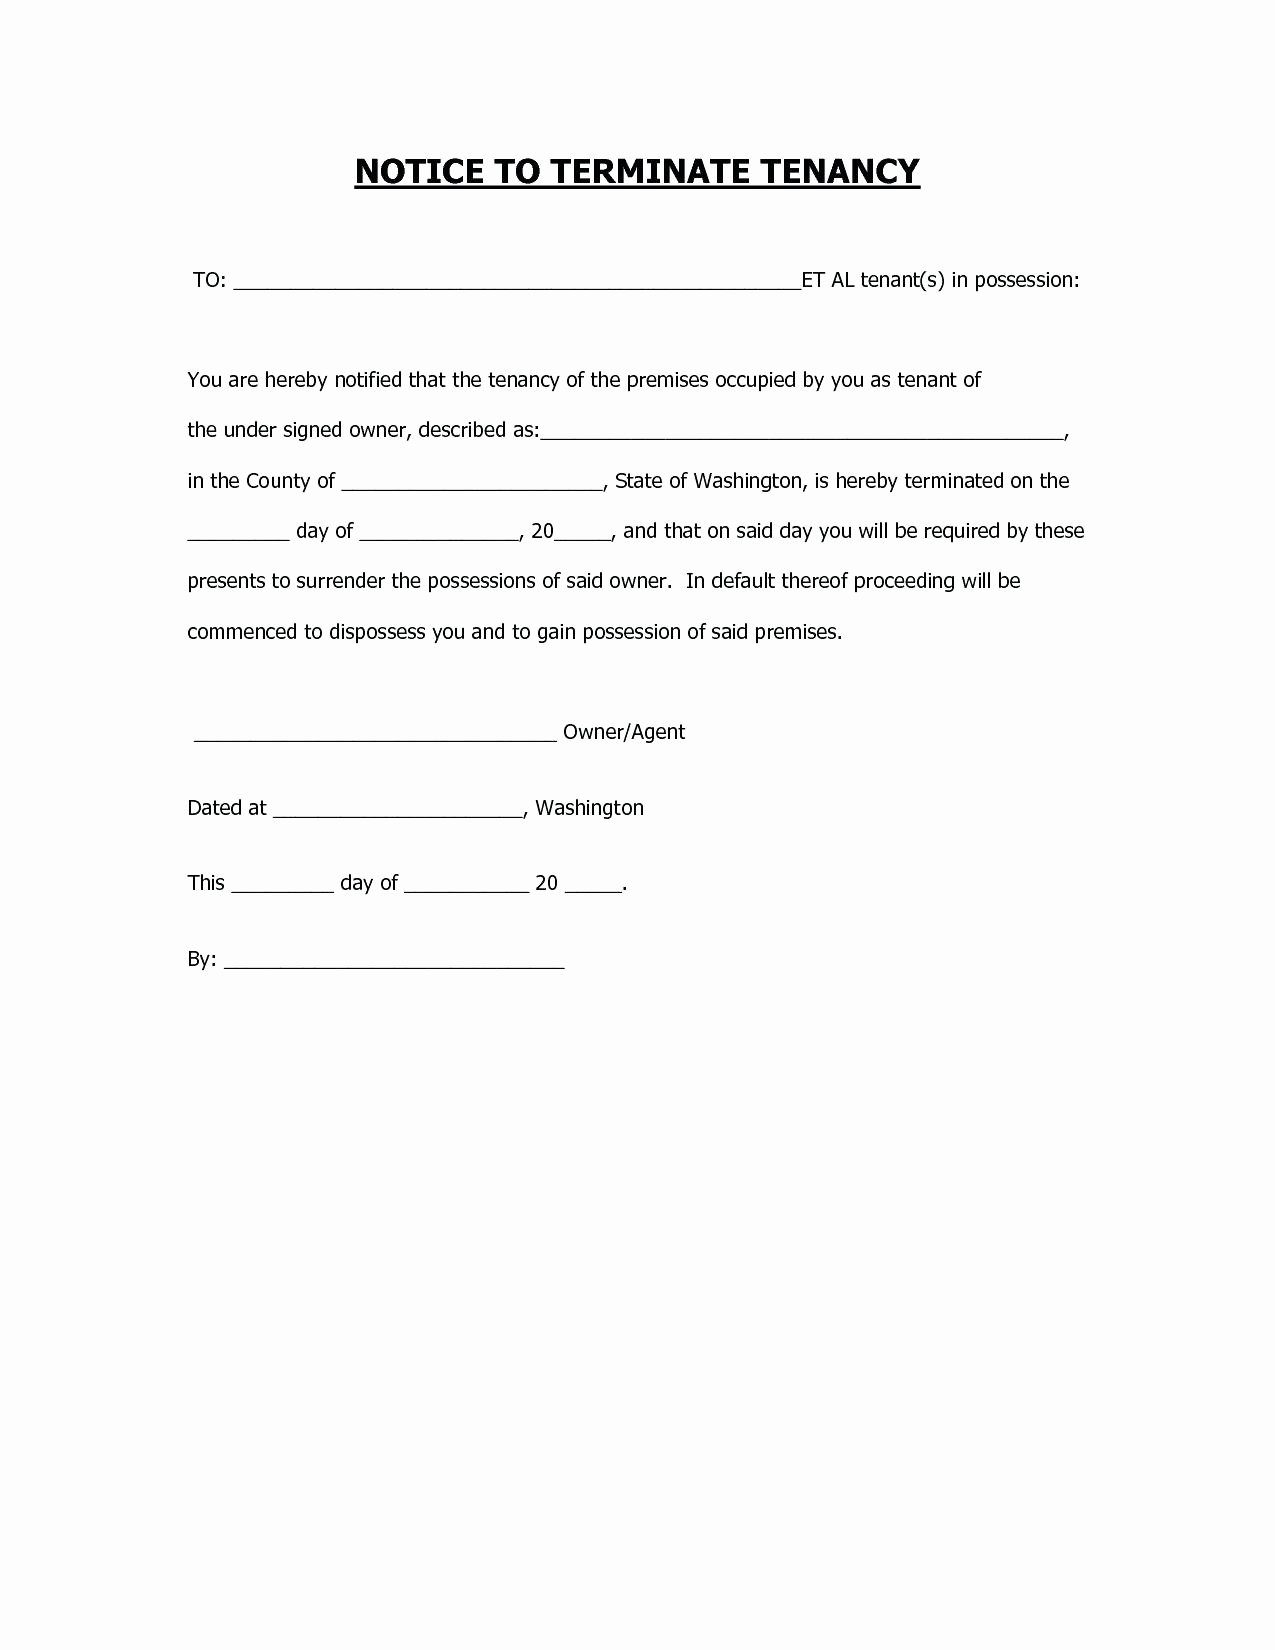 Template Lease Termination Agreement Template